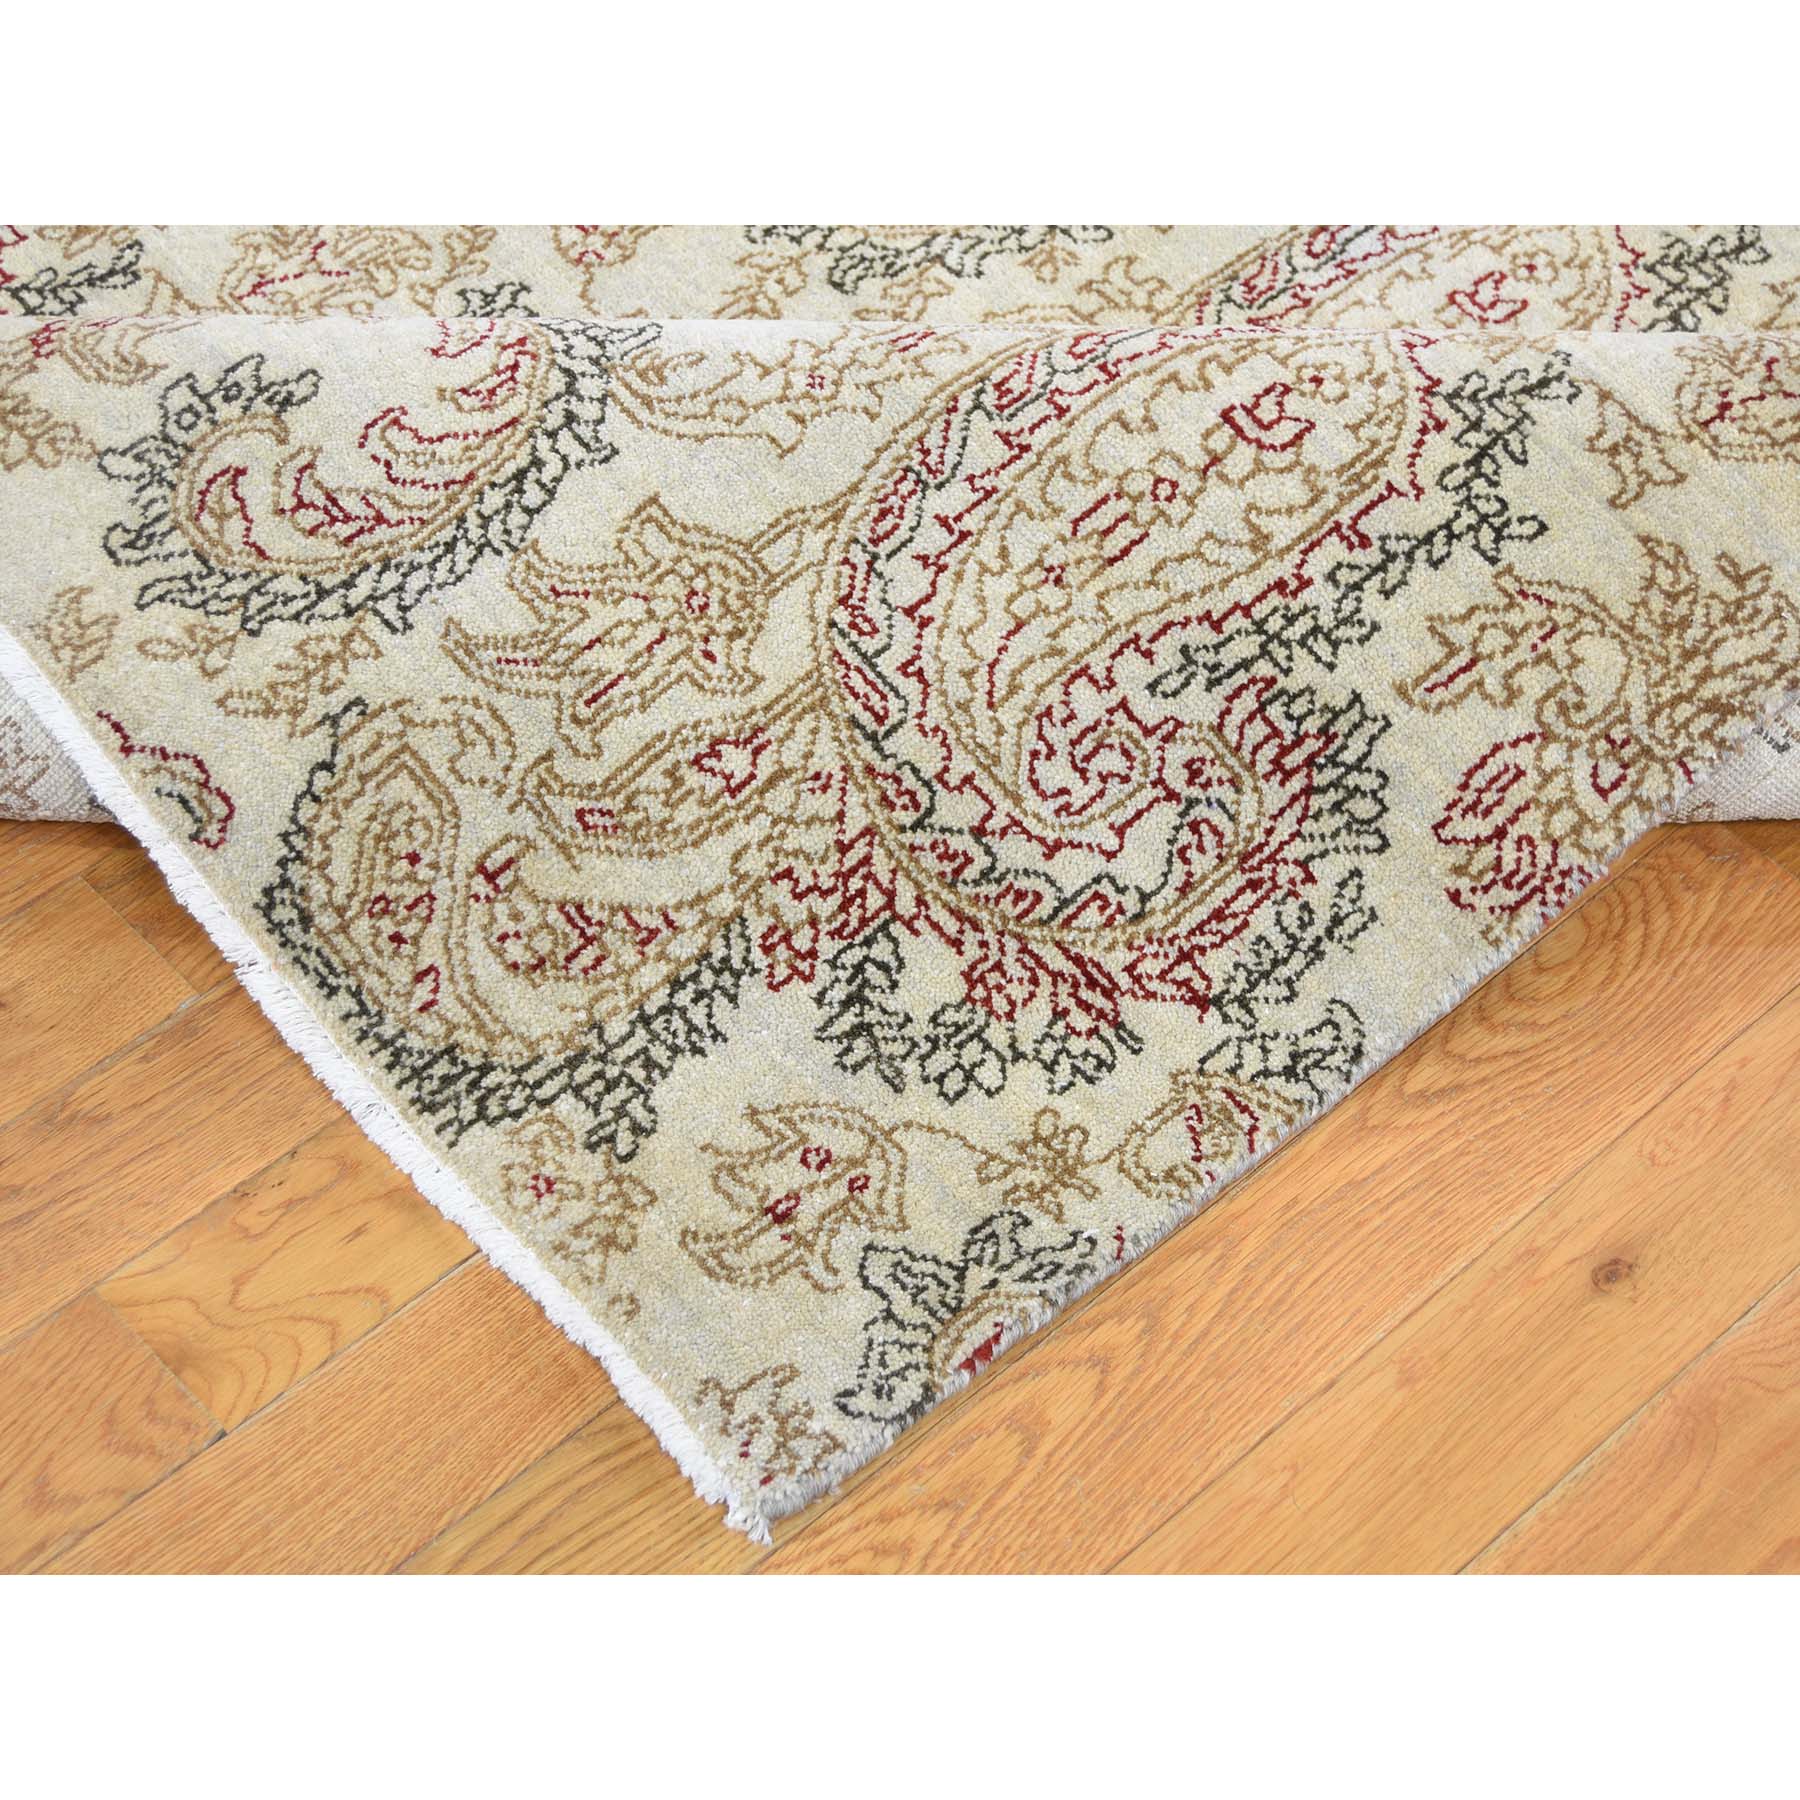 9'1"x12'3" Agra with Paisley Design 100 Percent Wool Hand Woven Oriental Rug 